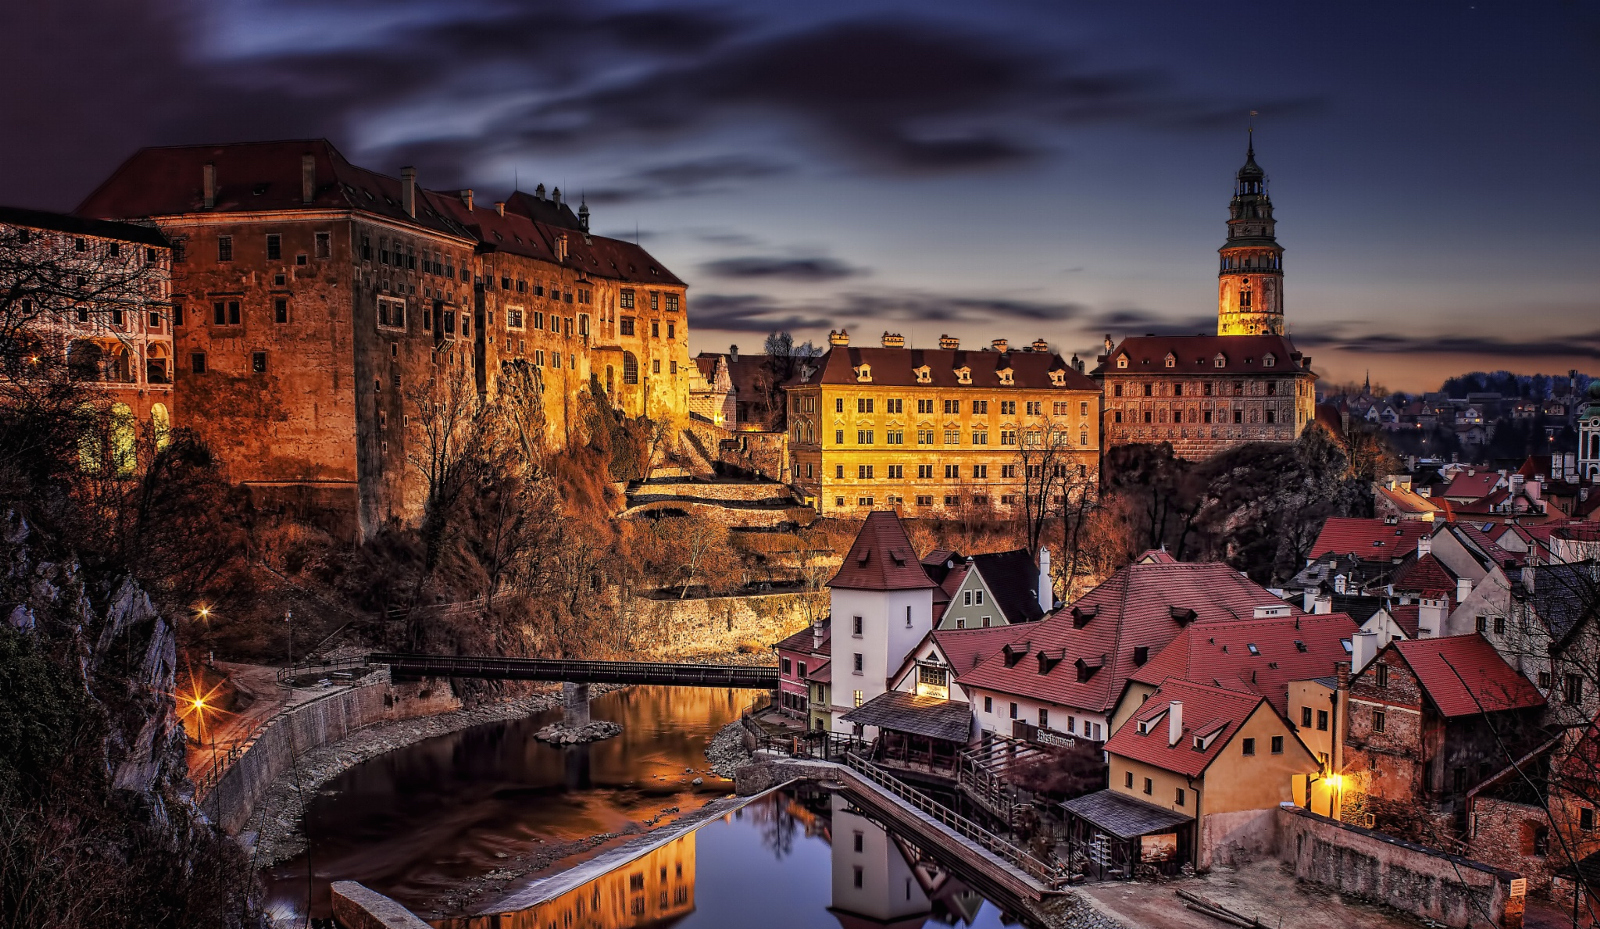 Discover Cesky Krumlov: One of the Most Magical Cities on Earth